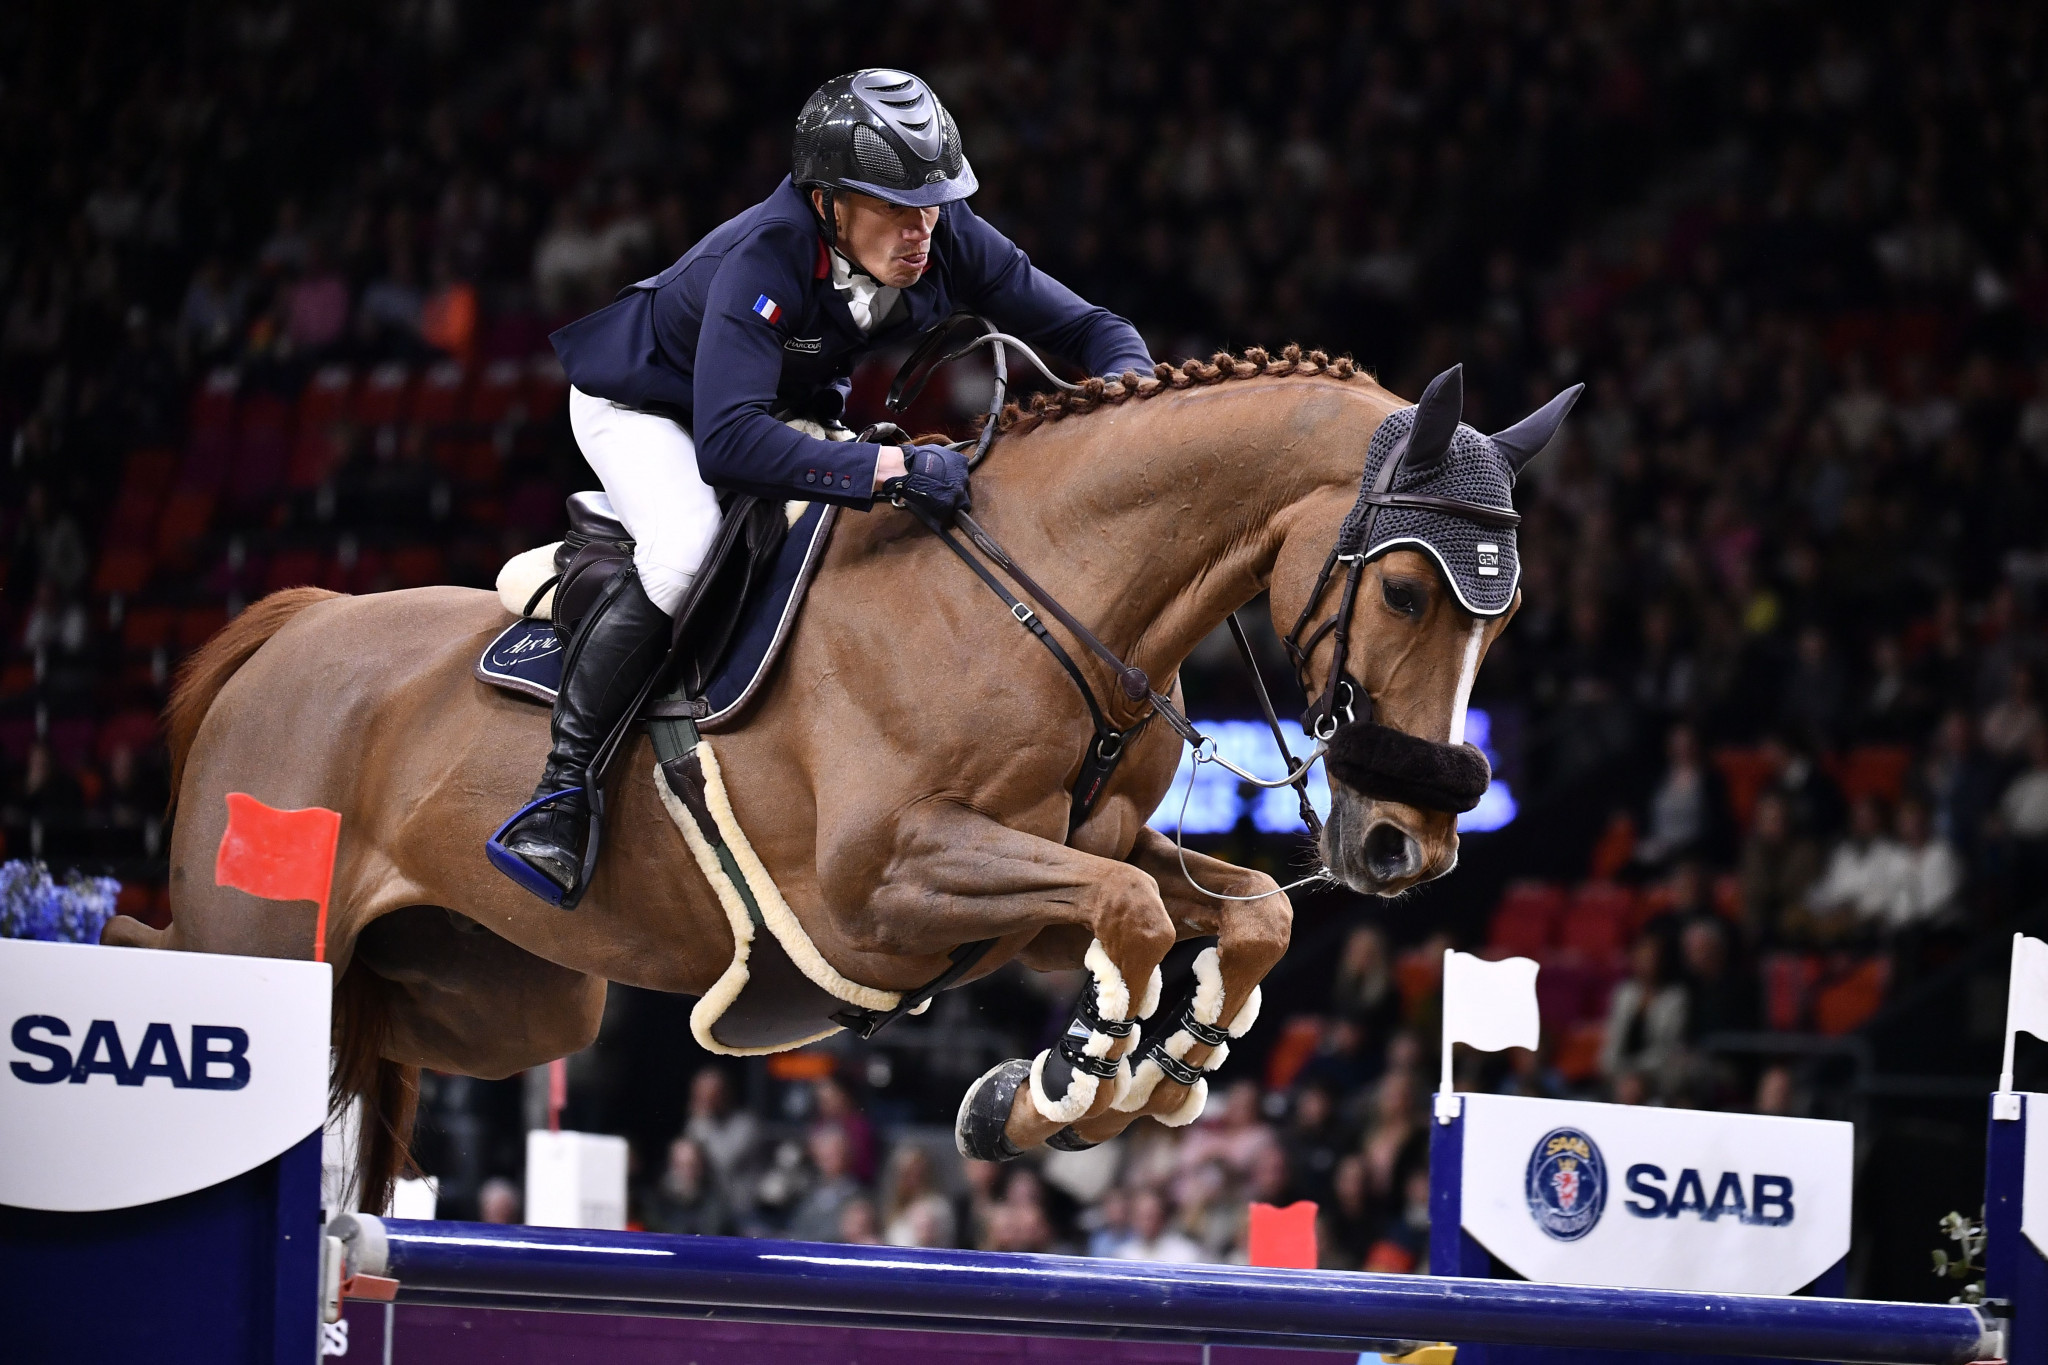 Frenchman Robert wins opening jumping competition at World Equestrian Festival in Aachen